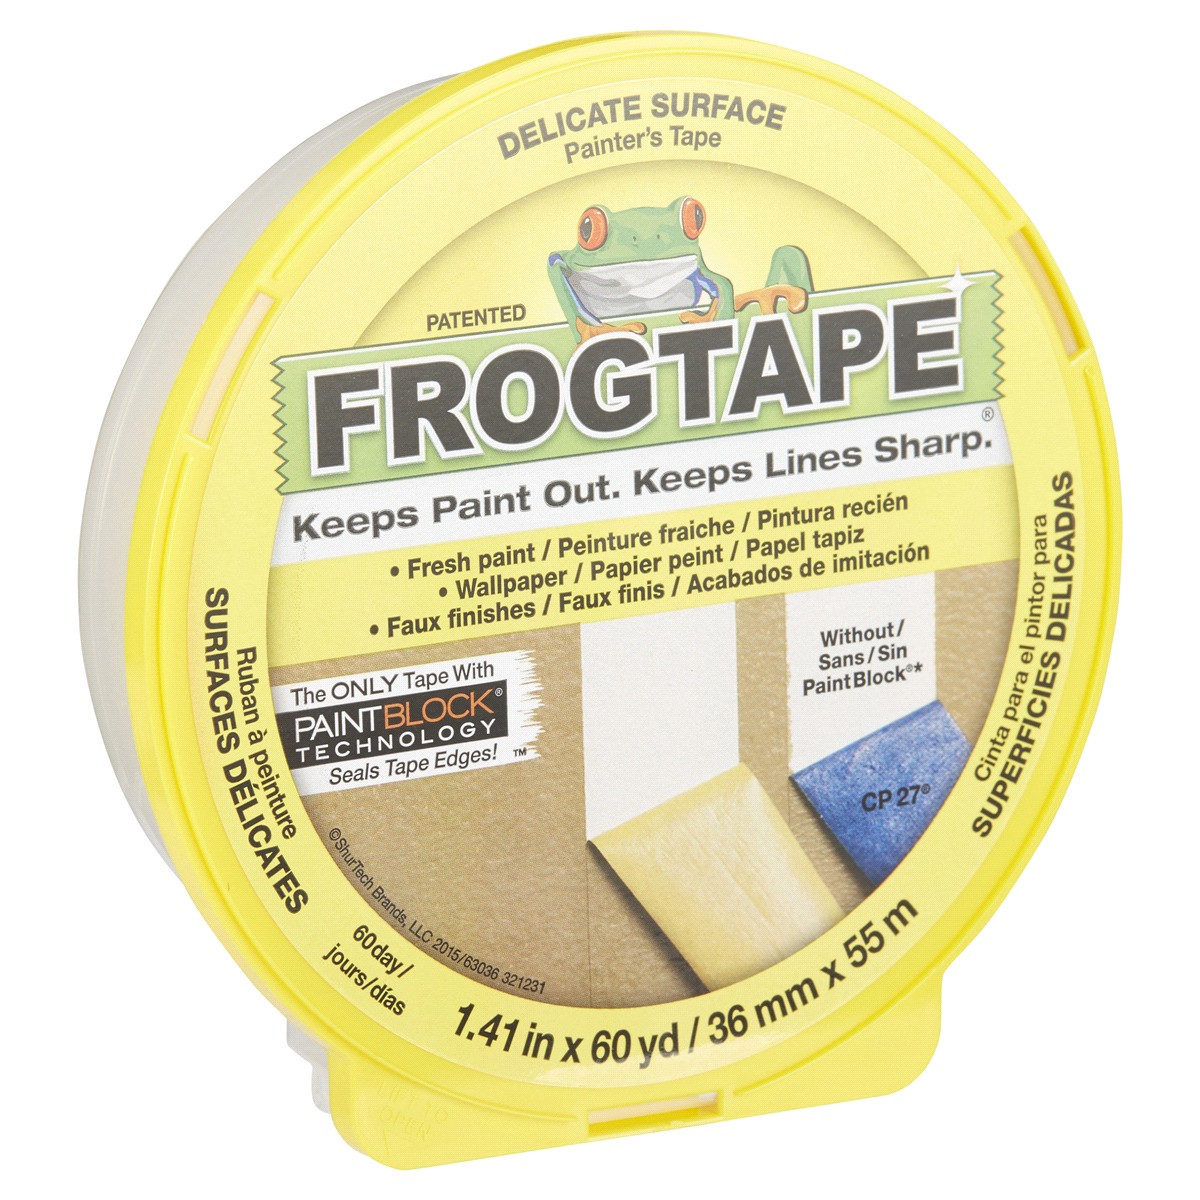 slide 6 of 29, DUCK FrogTape Delicate Surface Painting Tape, Yellow, 1.41 in. x 60 yd., 60 yd x 1.31 in